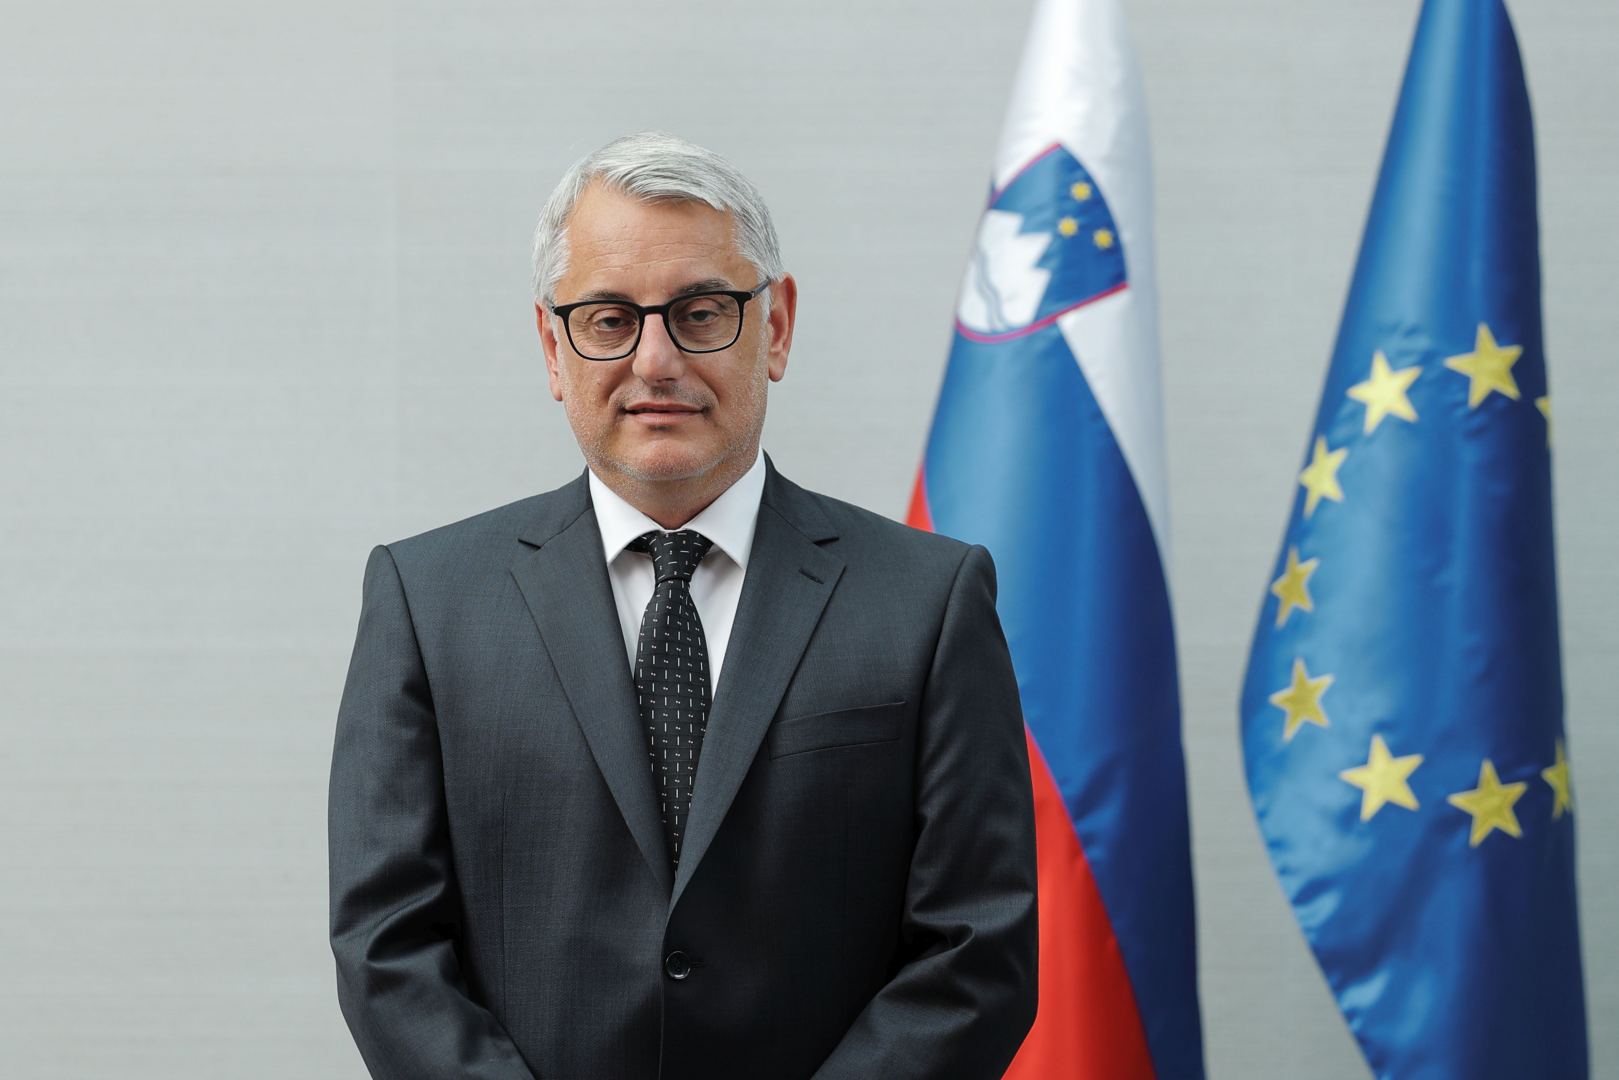 Slovenia, Azerbaijan can create a lot of green solutions, says minister